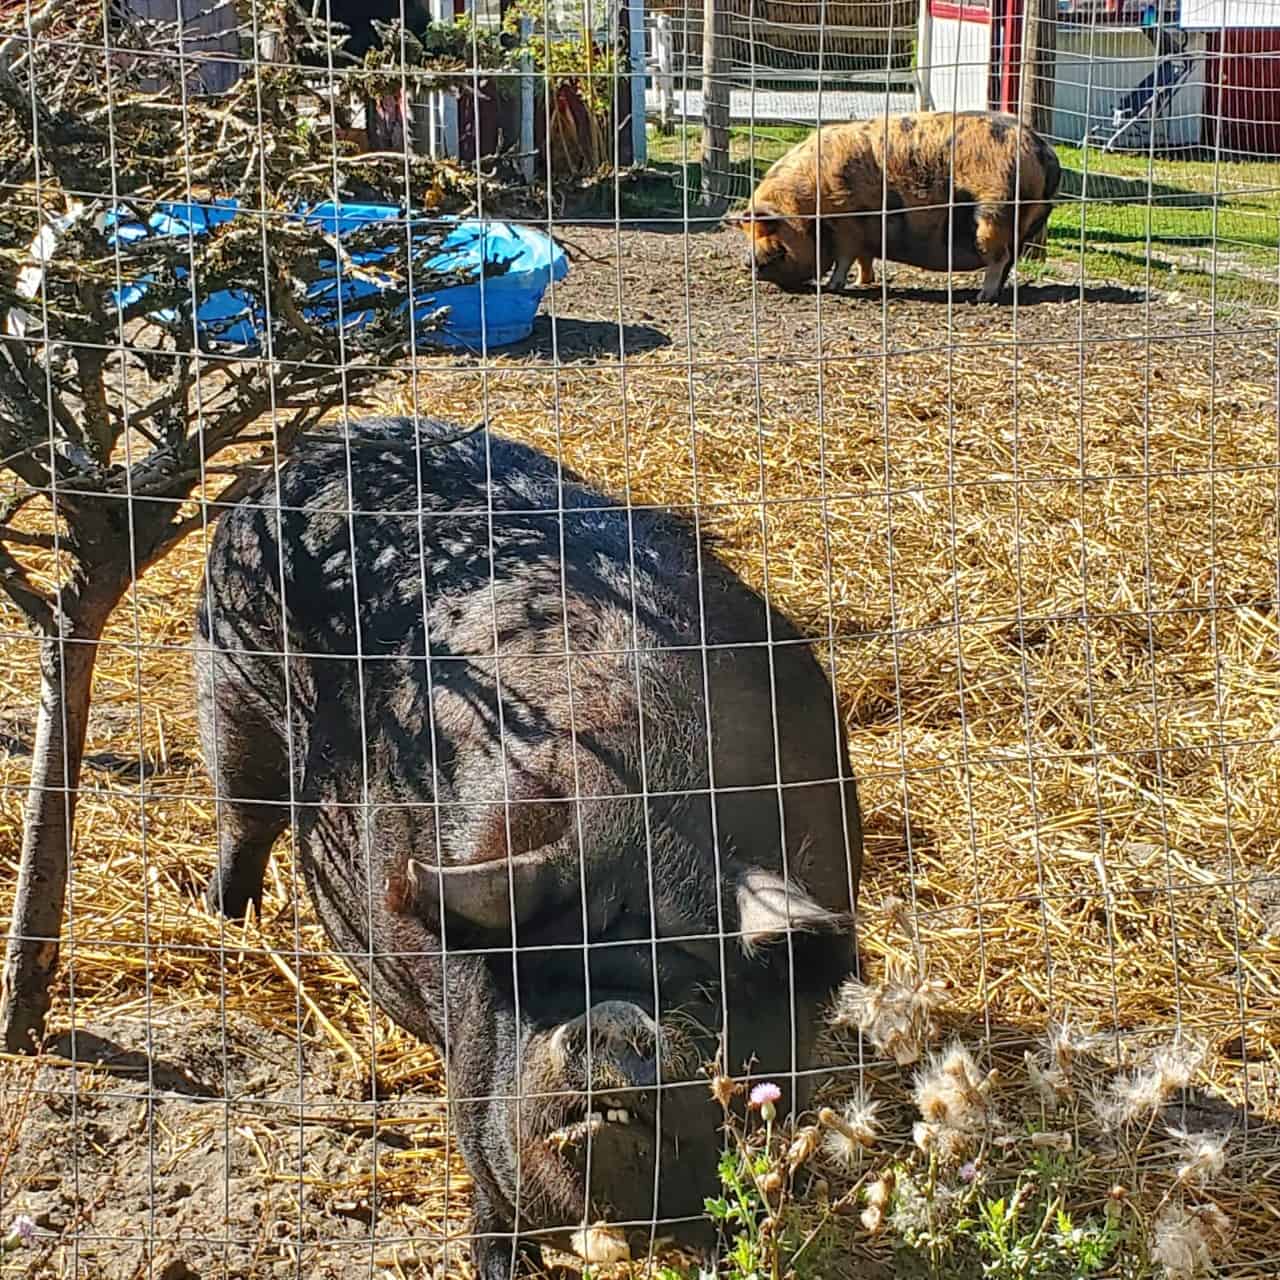 Pigs on the farm. - There were two pigs behind a fence at the Richmond Sunflower Festival. As well, there were a few goats and chickens to see. 